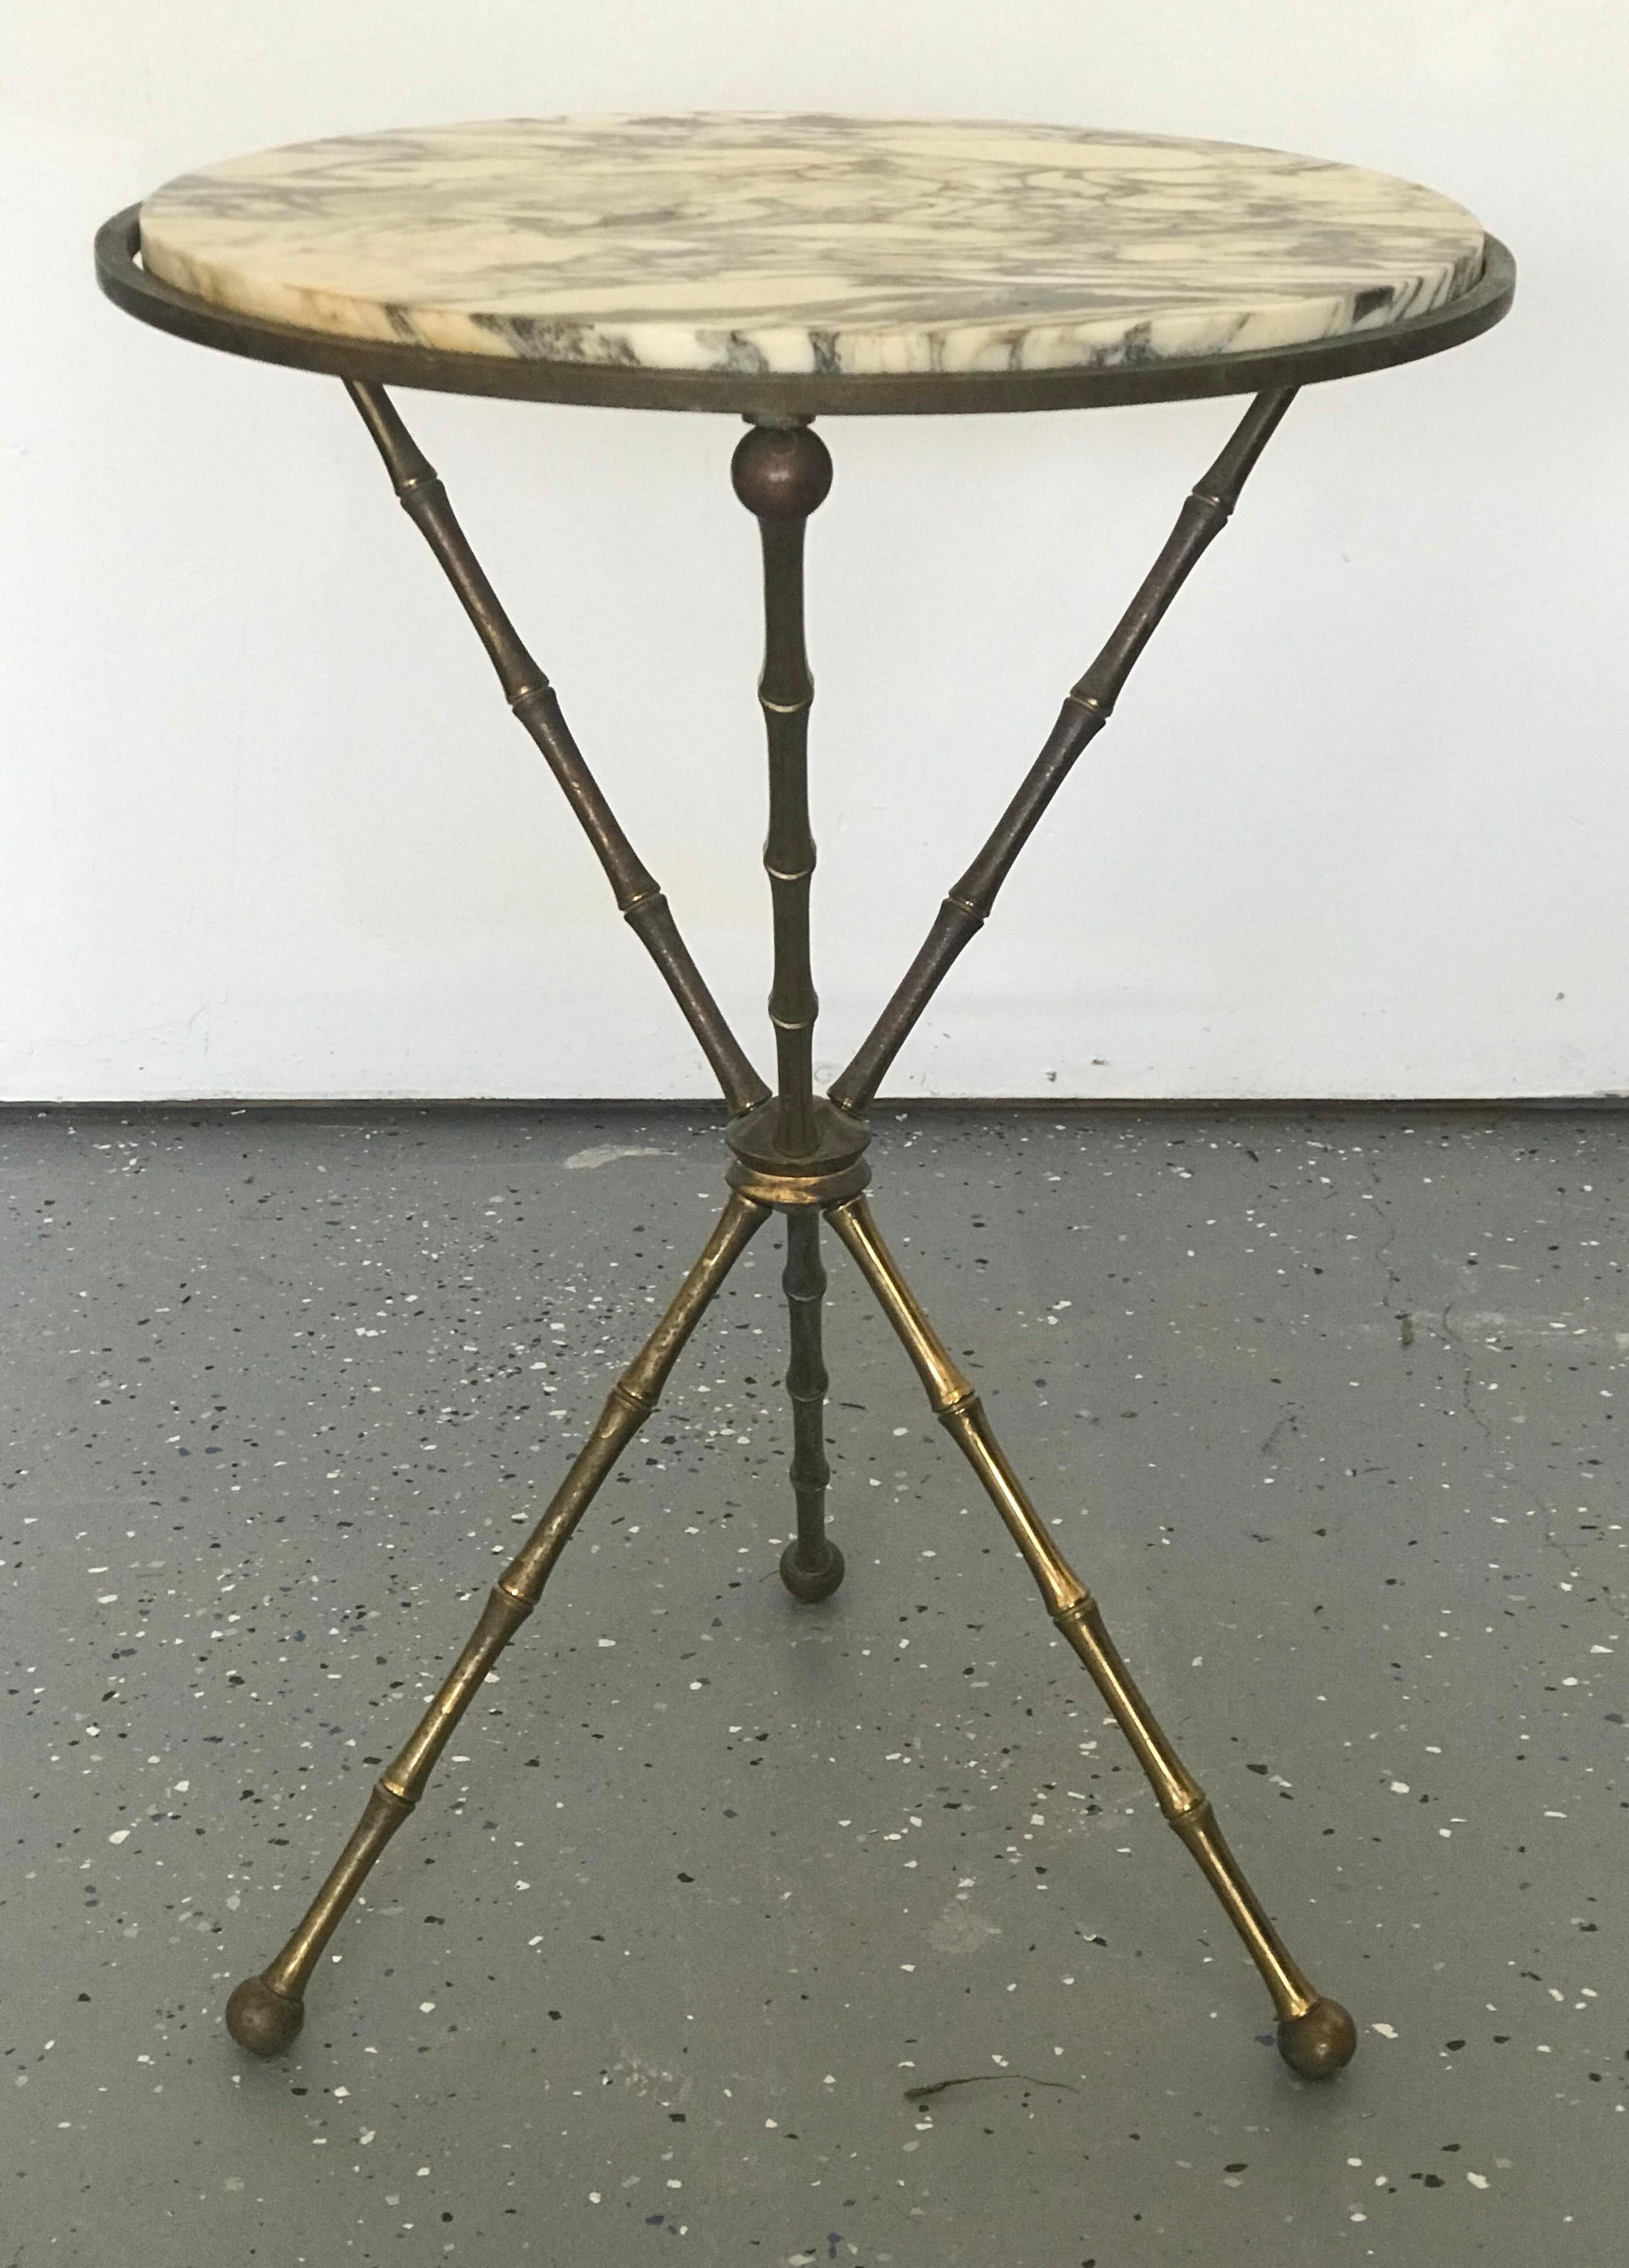 Marble and Brass table attributed to Maison Baguès. Excellent scale at 24